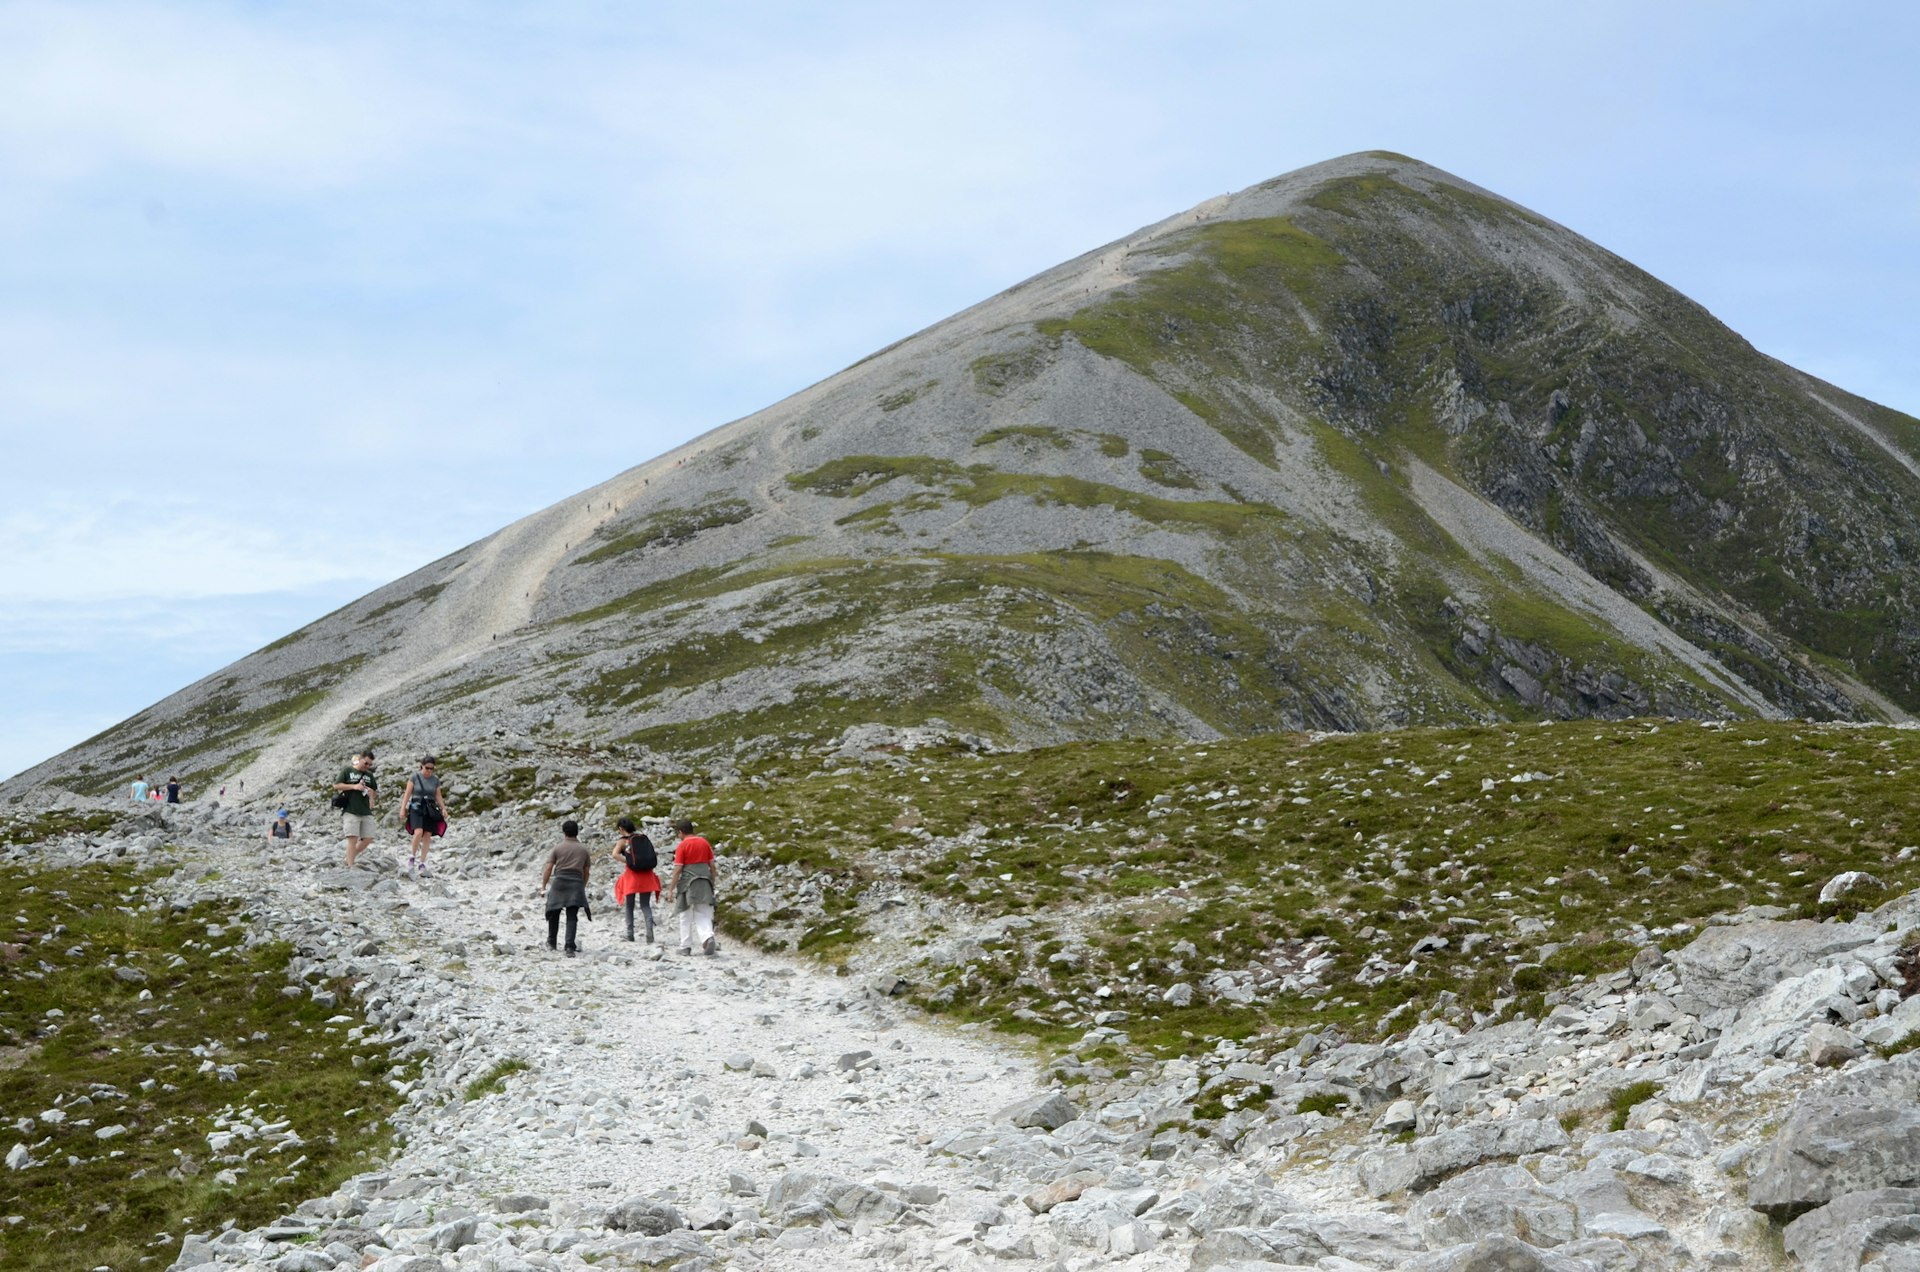 Hikers ascend and descend a steep gravel path leading towards a mountain peak